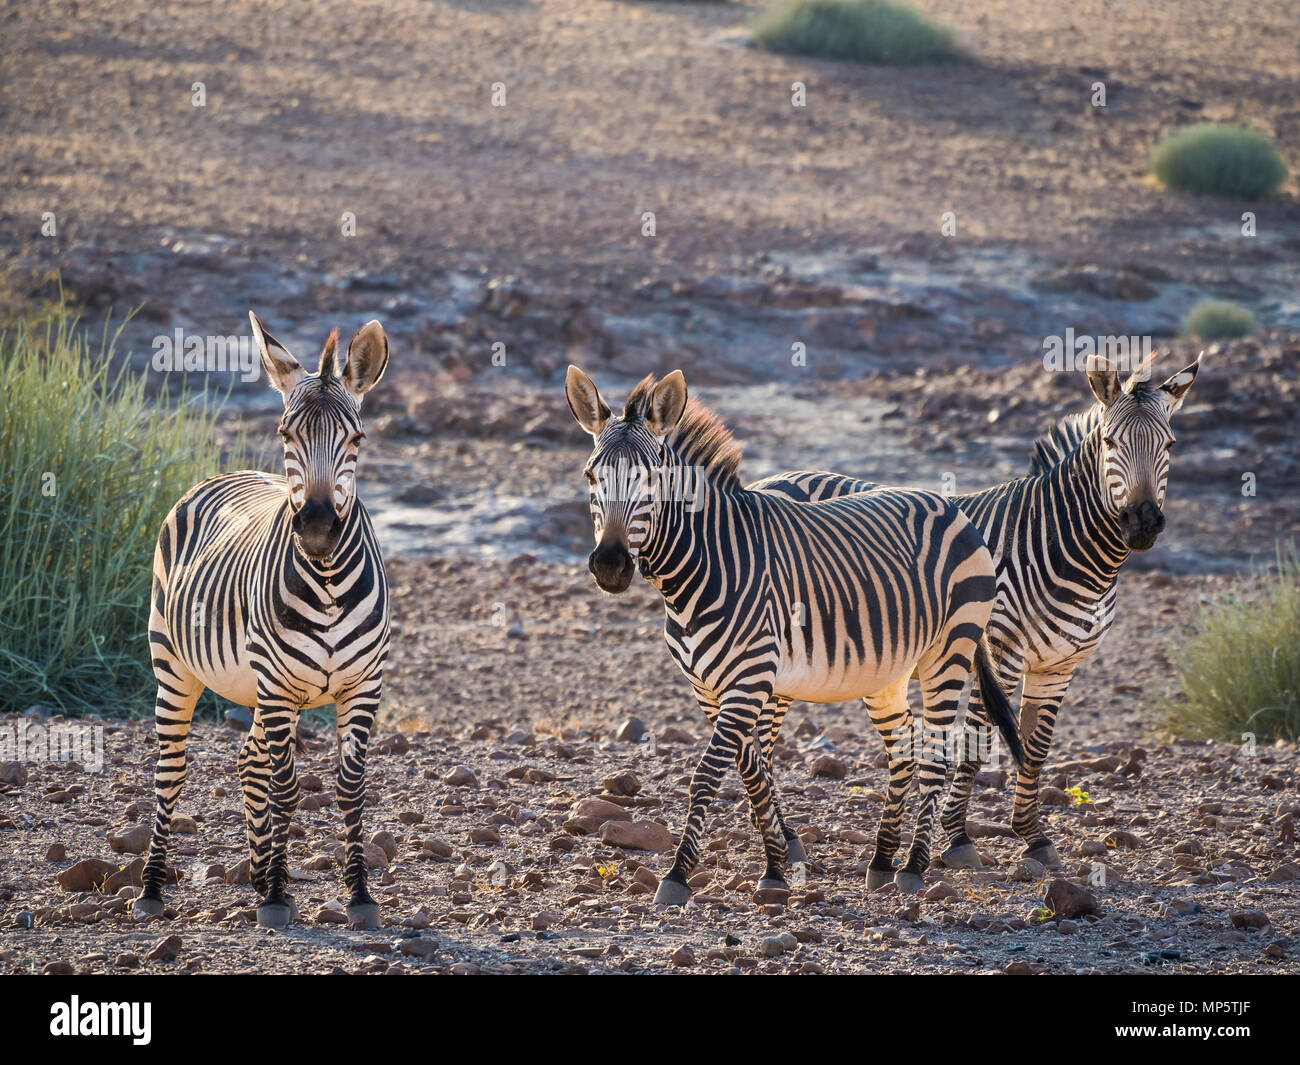 Three zebras standing in rocky surroundings during afternoon light, Palmwag Concession, Namibia, Africa Stock Photo